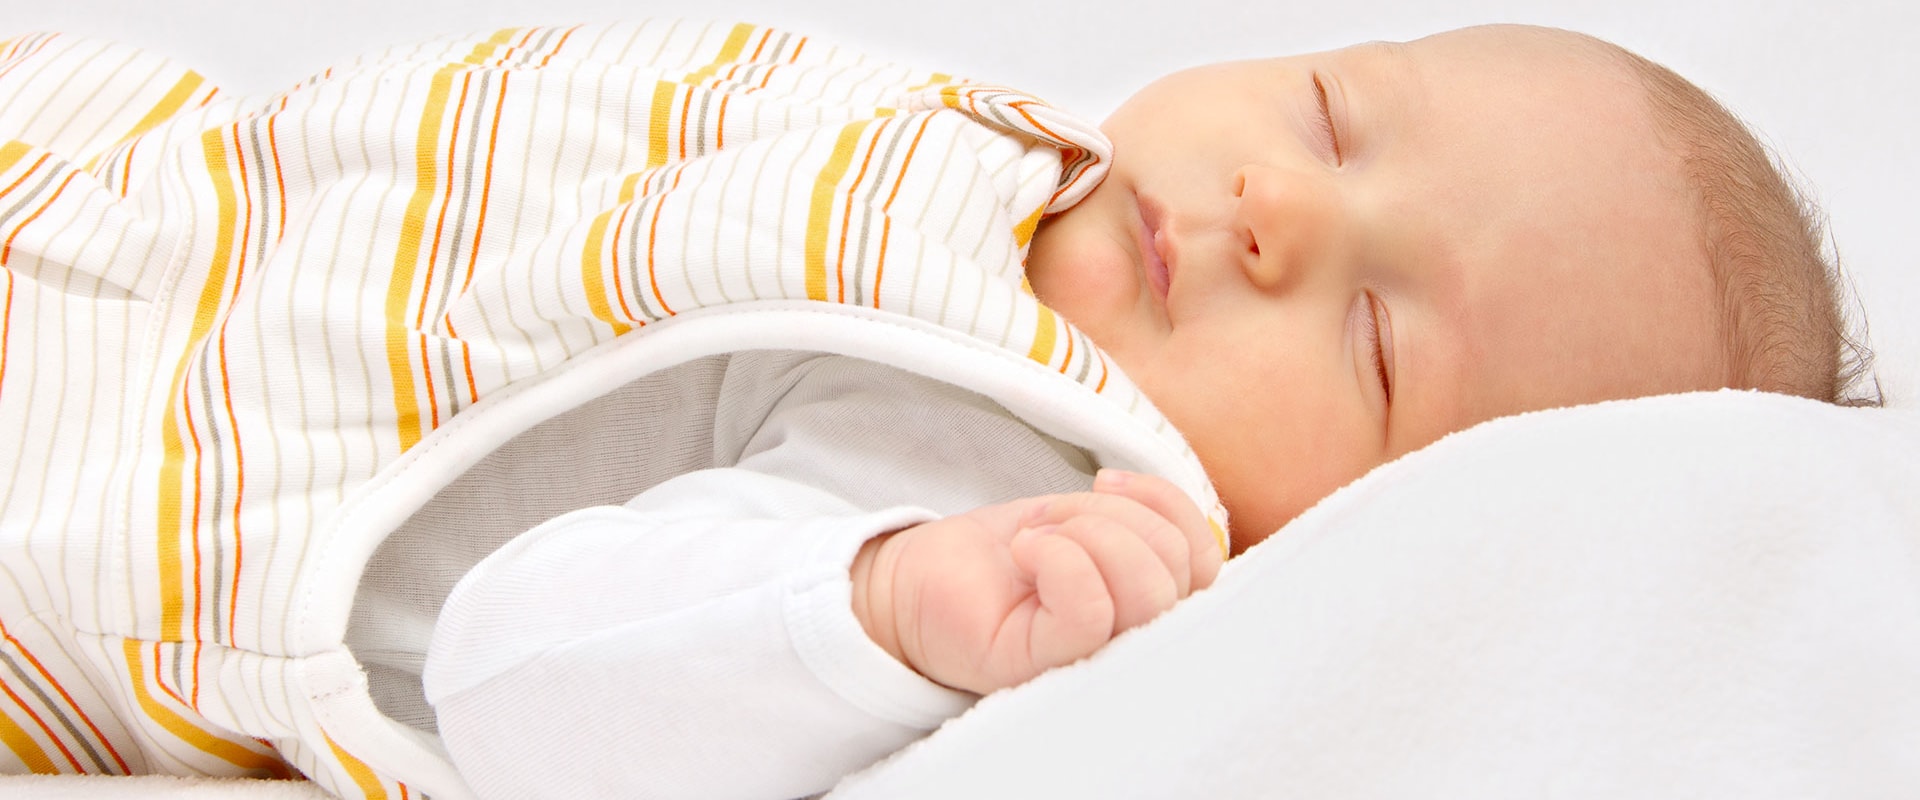 Is It Safe for Babies to Sleep in Sleeping Bags? - A Guide for Caregivers